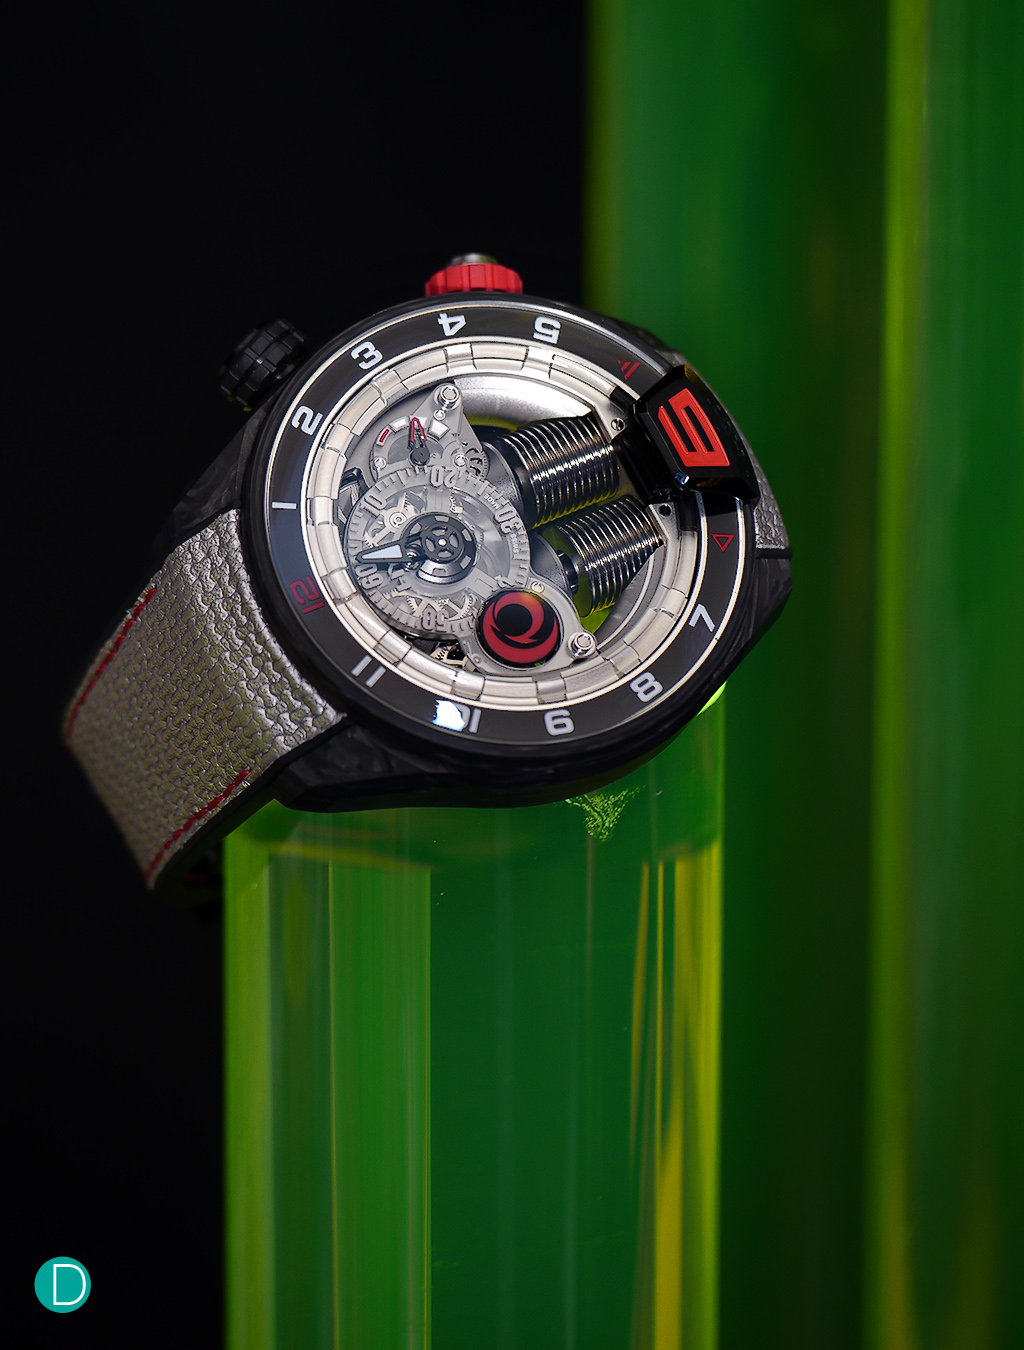 The HYT H4 Alinghi is available in a carbon case, red liquid, white light, with the Alinghi team logo on the seconds disc and a strap made from sail canvas. 25 pieces limited edition.